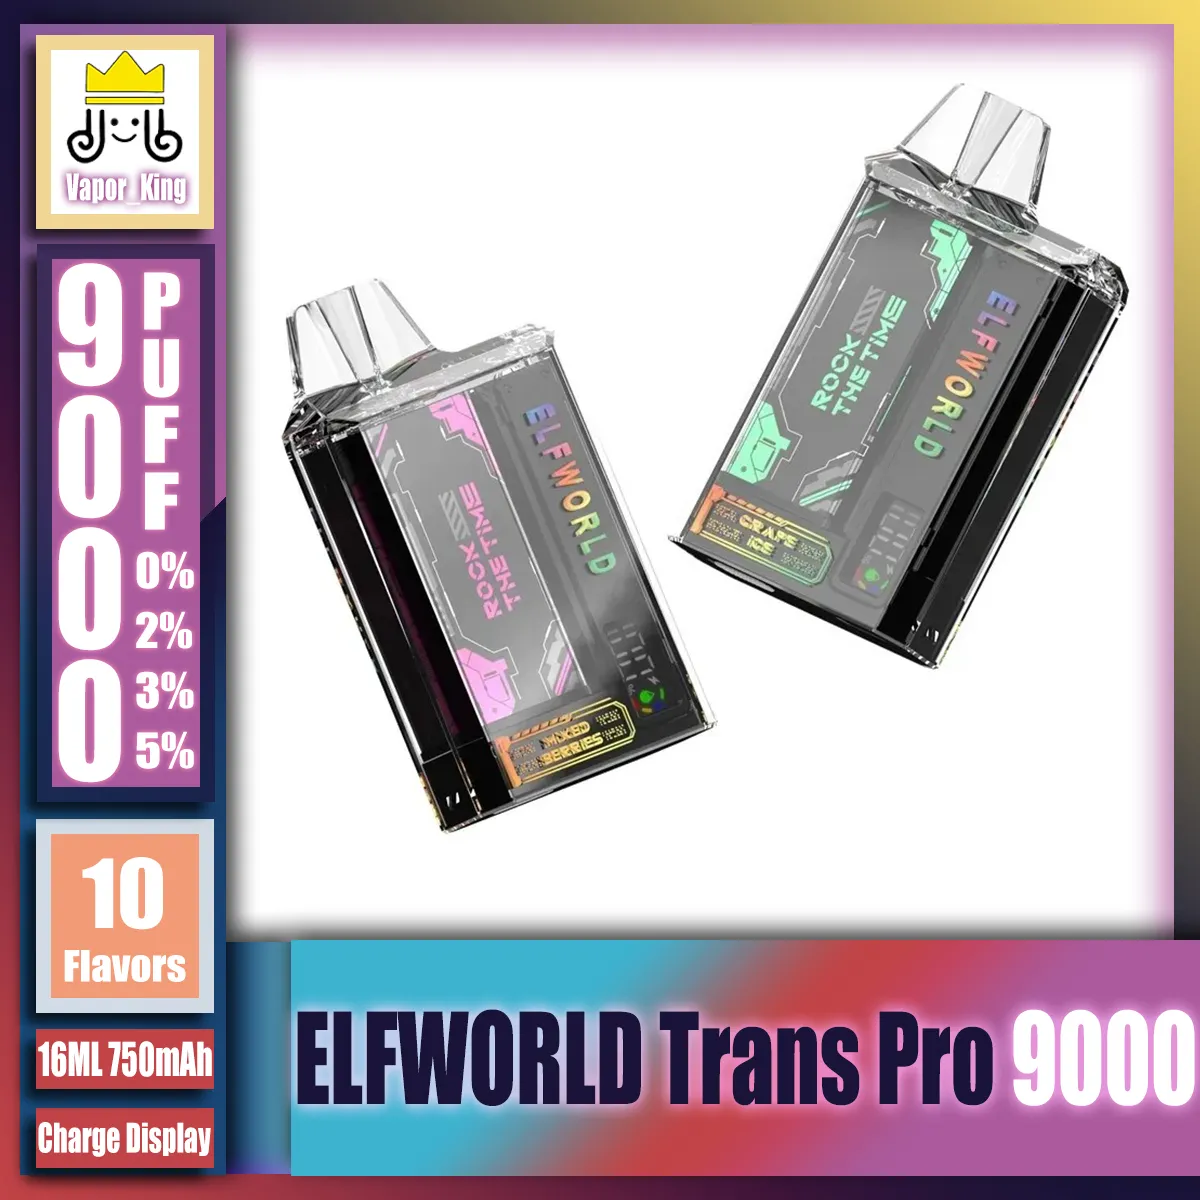 Original ELFWORLD TRANS PRO 9000 Puffs Crystal Shell With Charge Display Rechargeable Disposable E Cigarettes Vape Pen With 750mAh Battery 16ml Pre-filled Mesh Coil